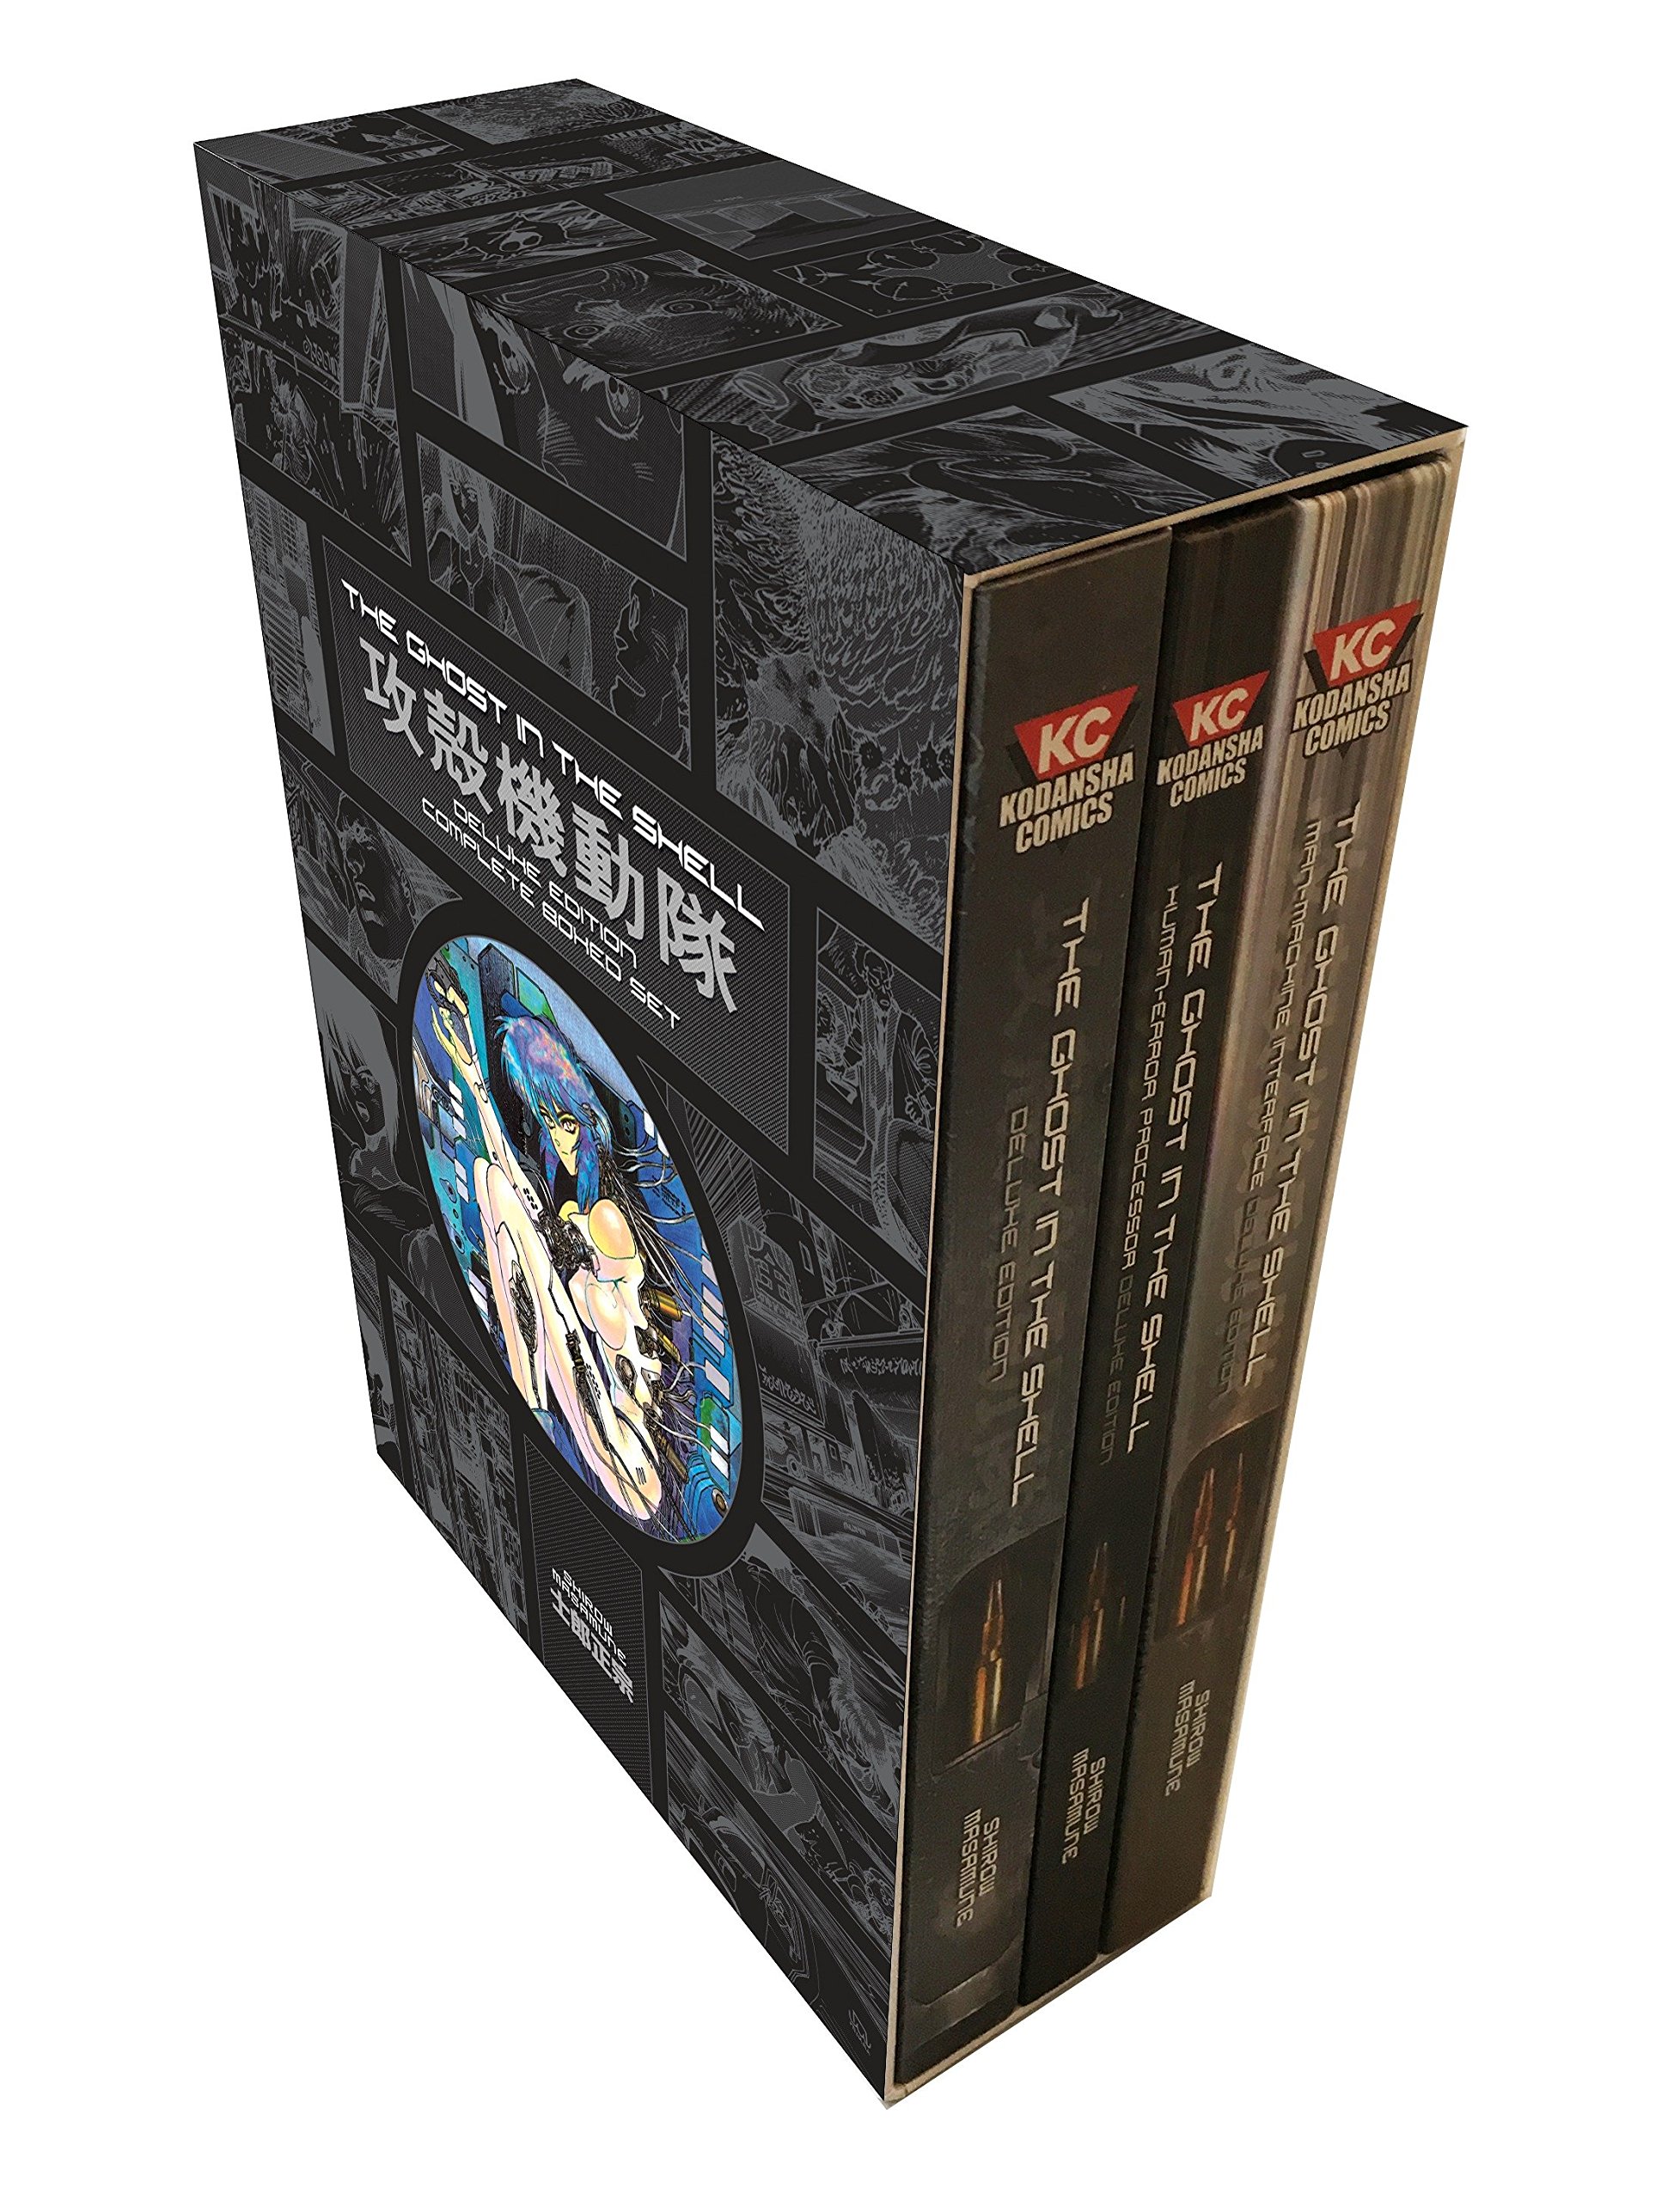 The Ghost In The Shell Deluxe Complete Box Set | Masamune Shirow